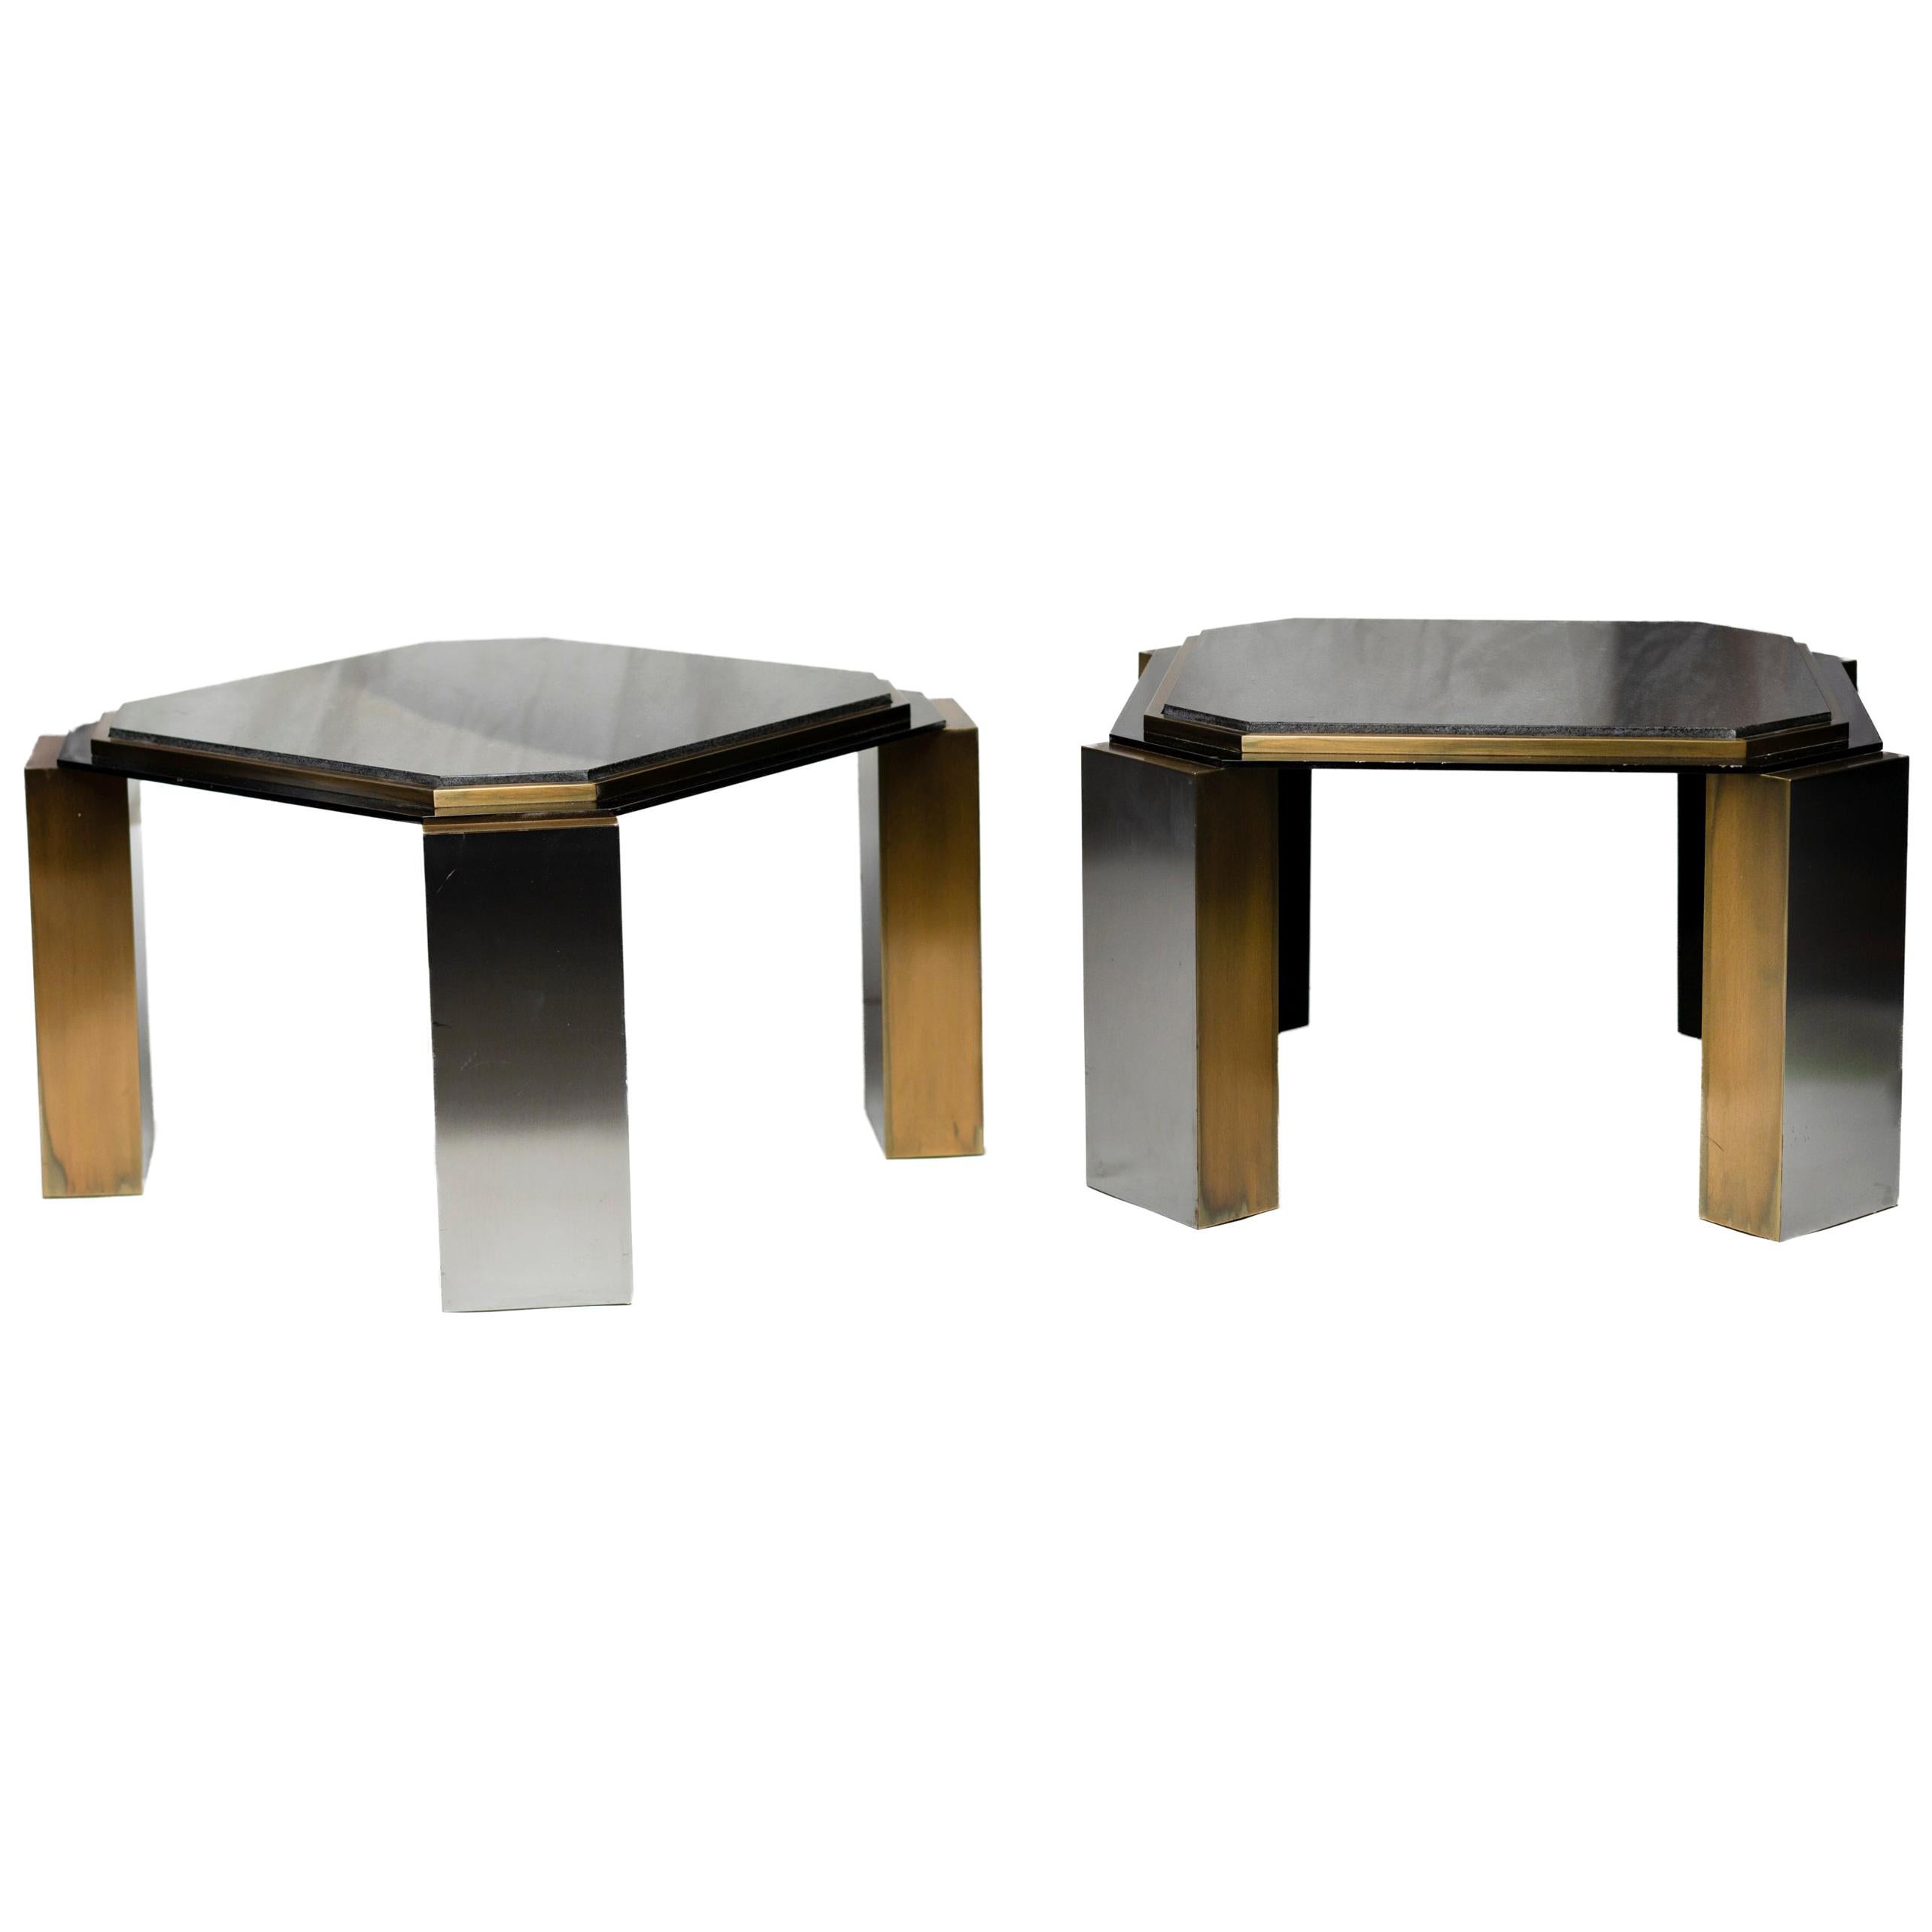 Pair of 1980's Modernist Low Tables in Enameled Steel and Patinated Brass